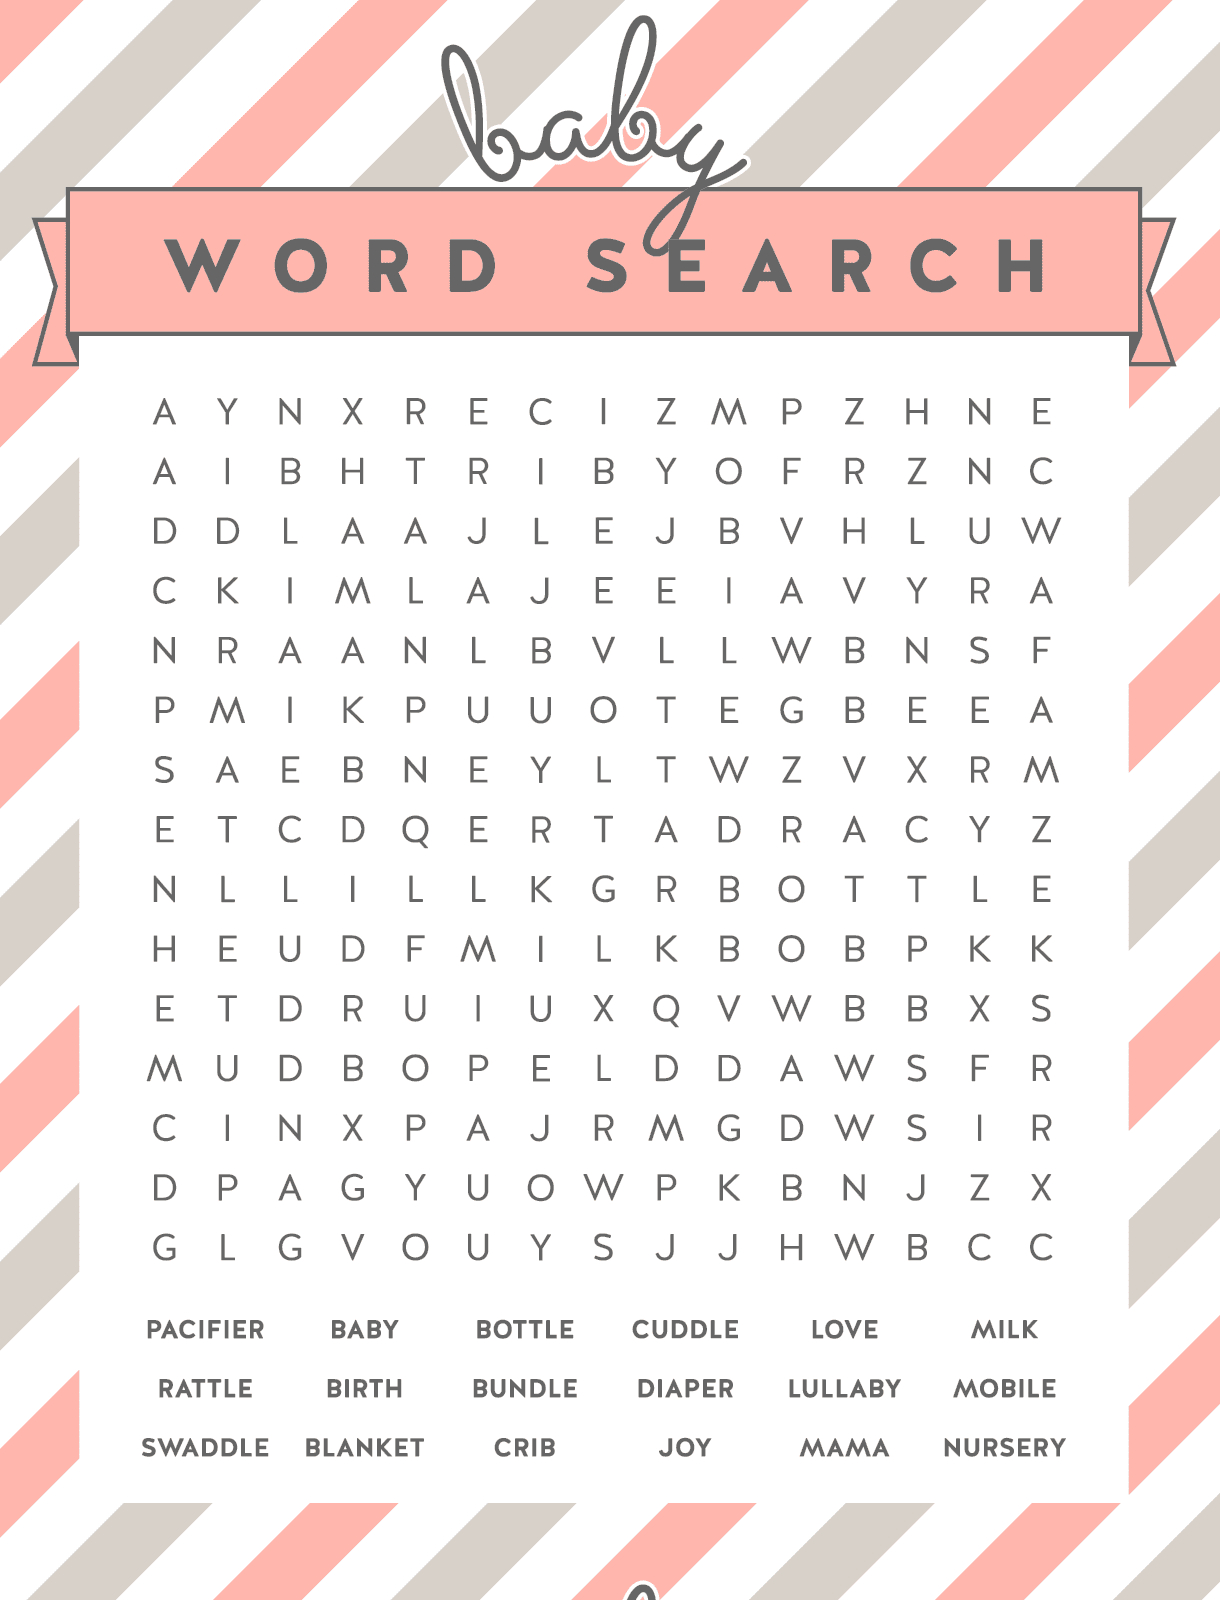 Free Baby Shower Word Search Puzzles - Printable Baby Shower Crossword Puzzle Game